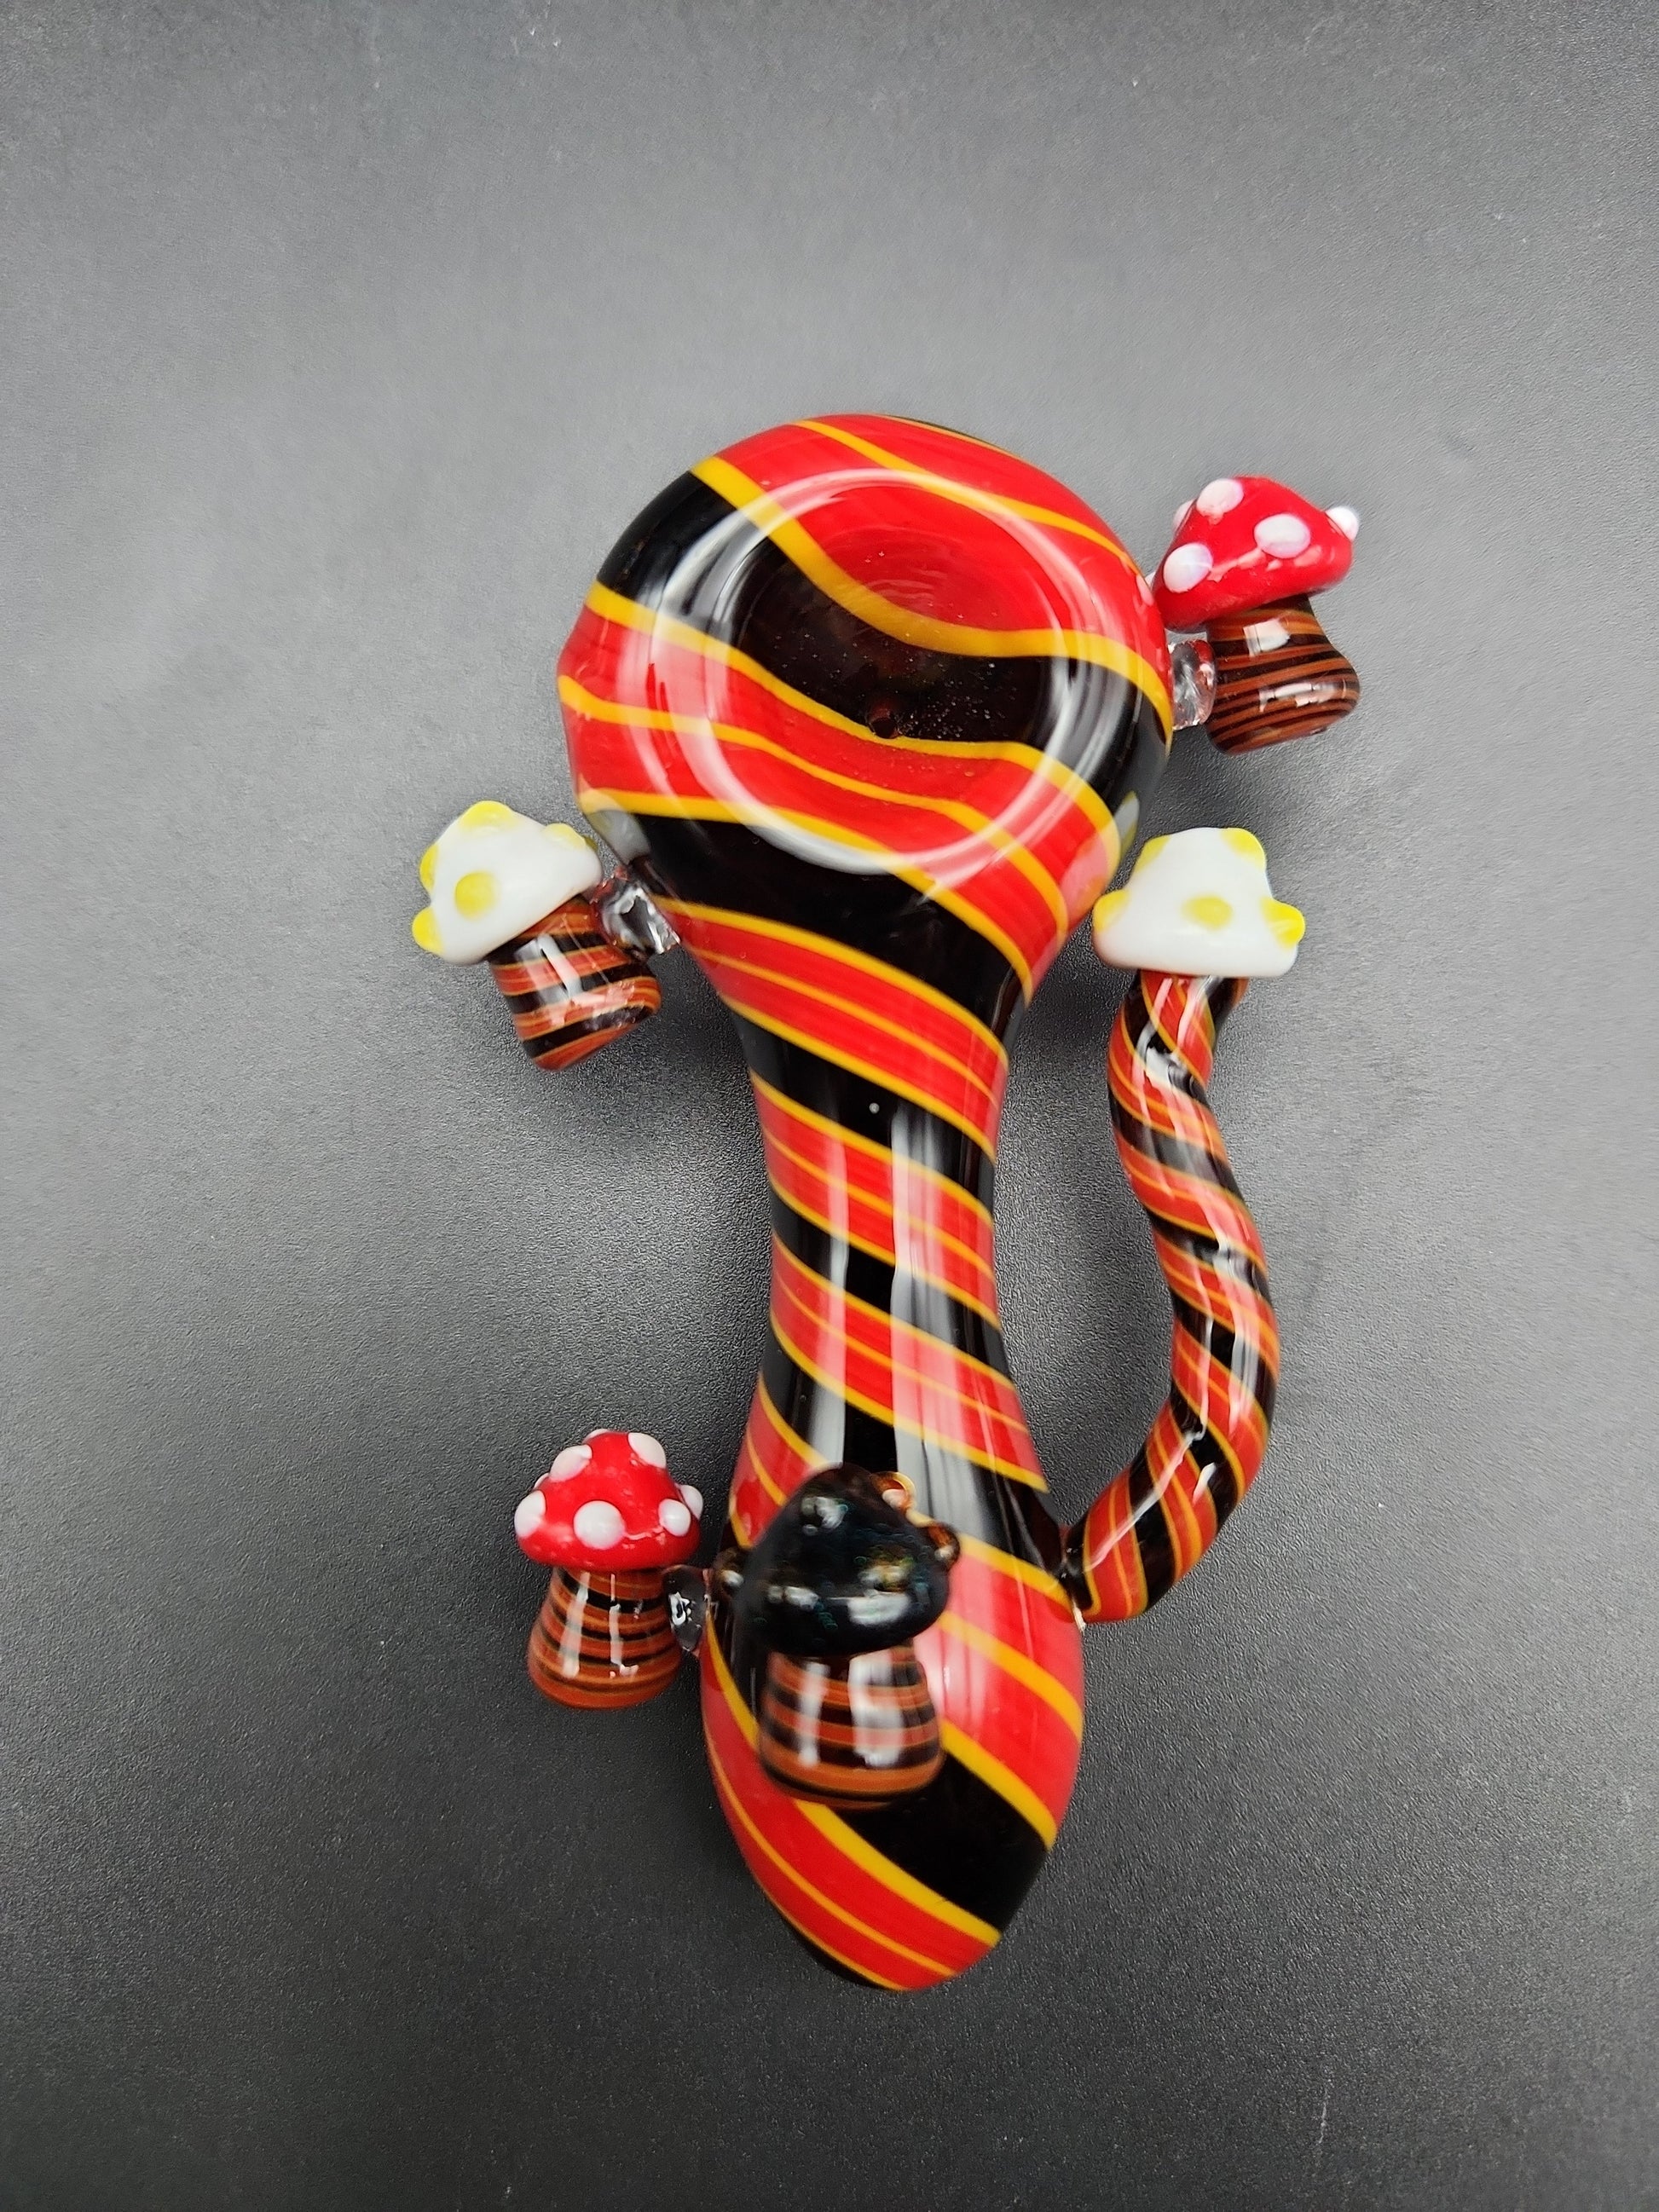 4" Color Spiral Mushroom Spoon Pipes - red and black